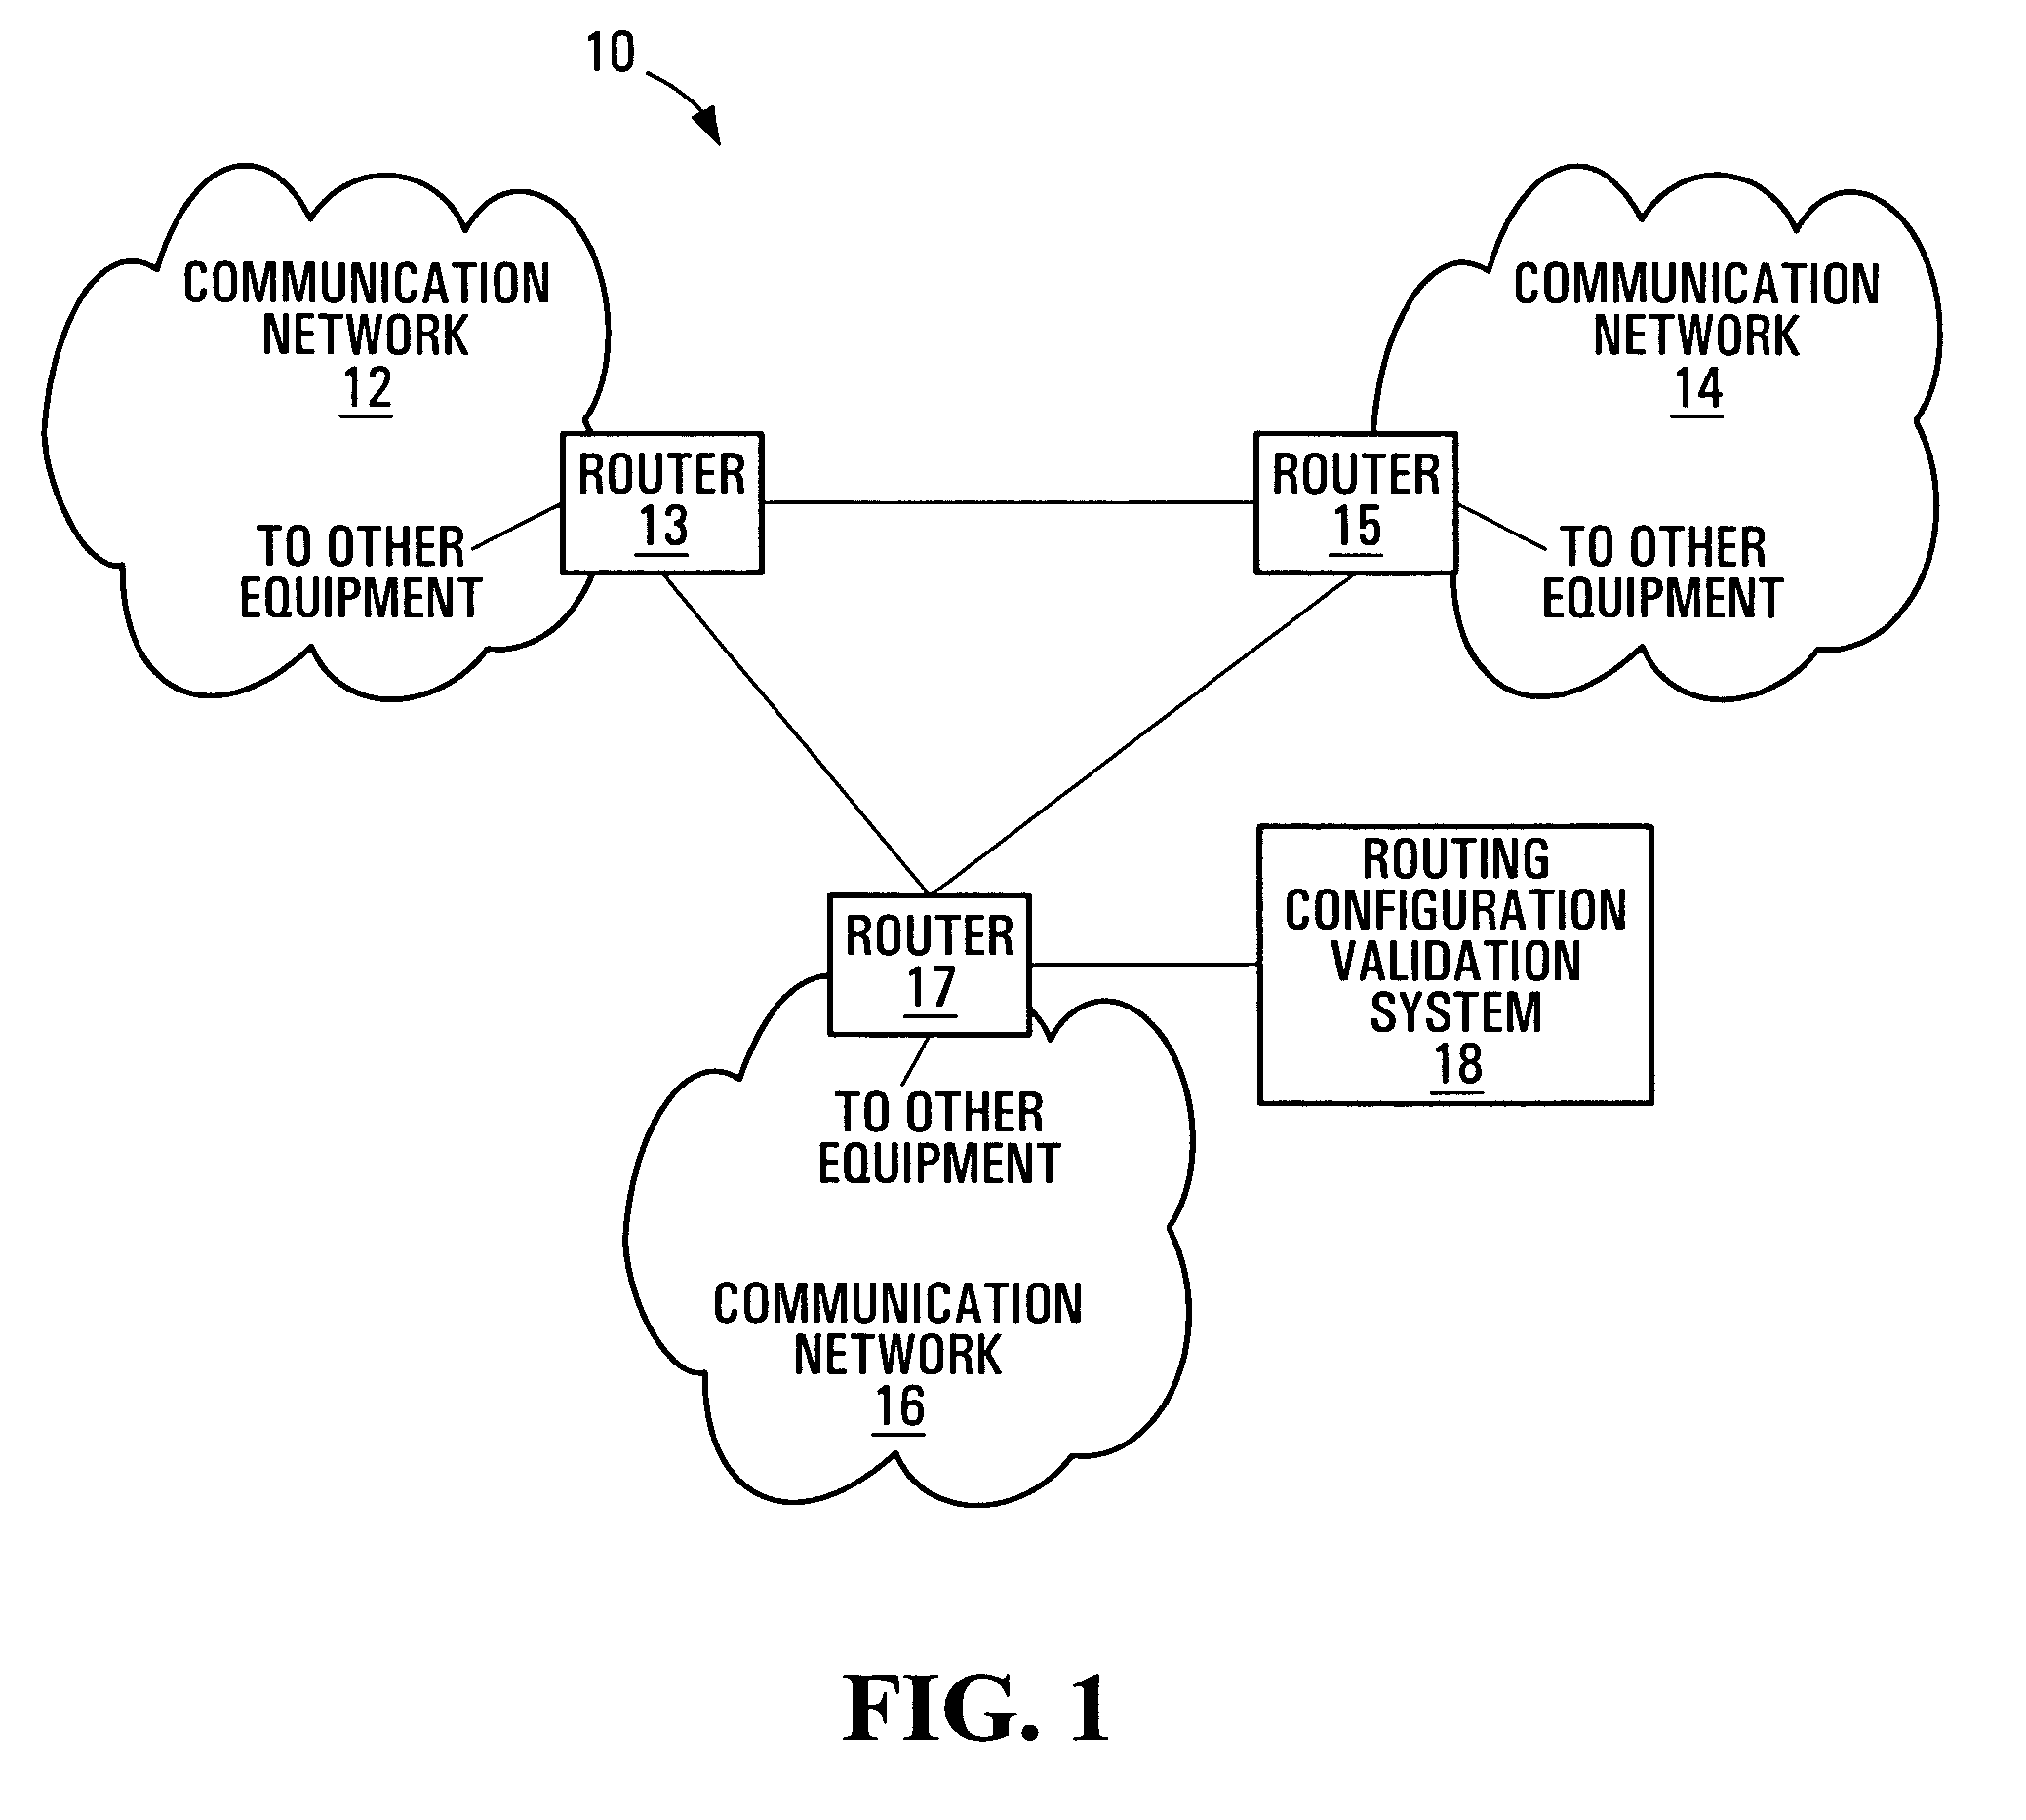 Routing configuration validation apparatus and methods